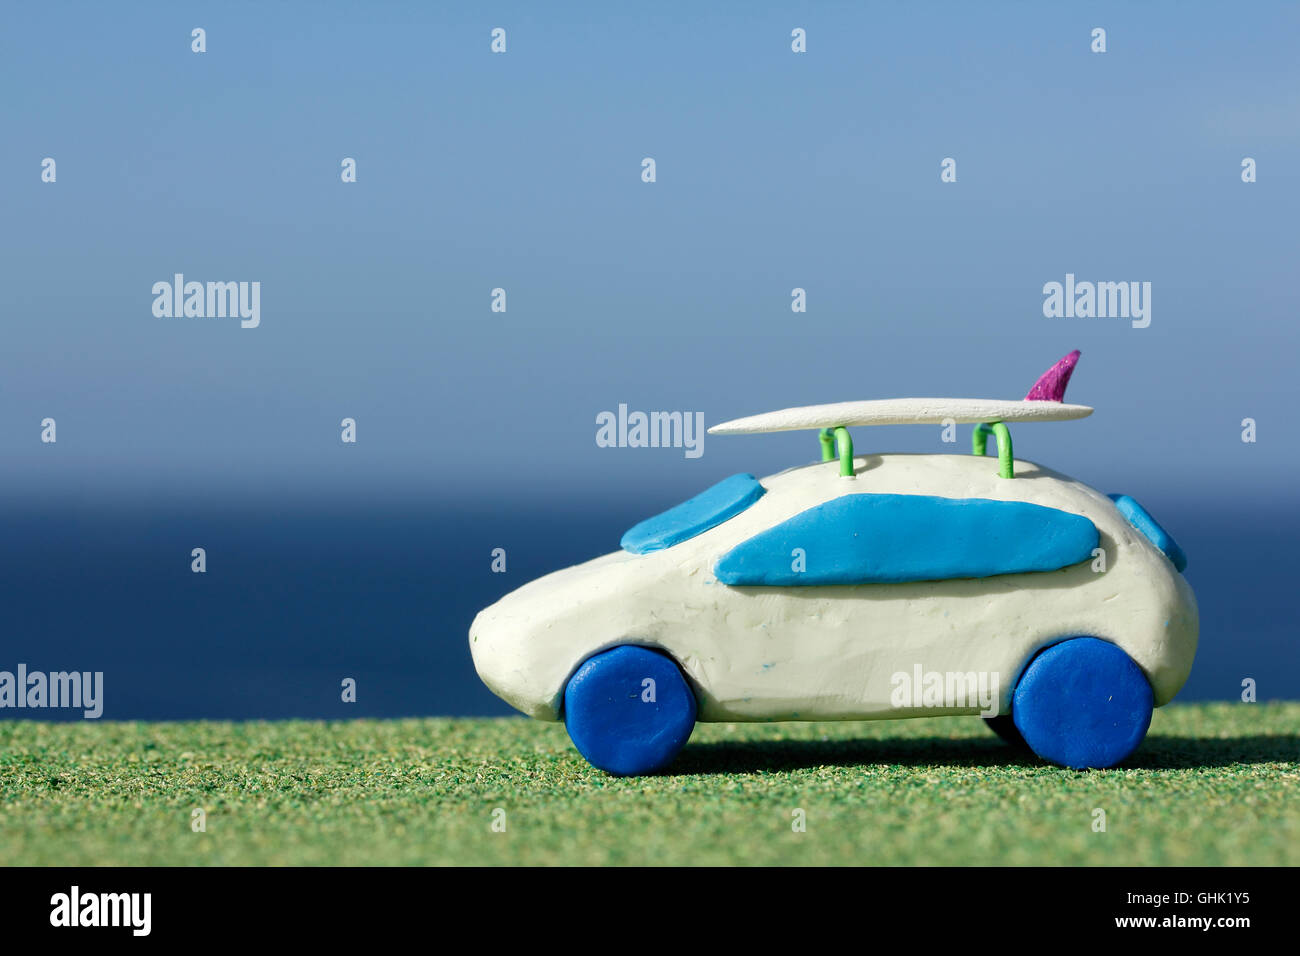 Plasticine Car and Balsa Wood Surfboard by the Ocean Stock Photo